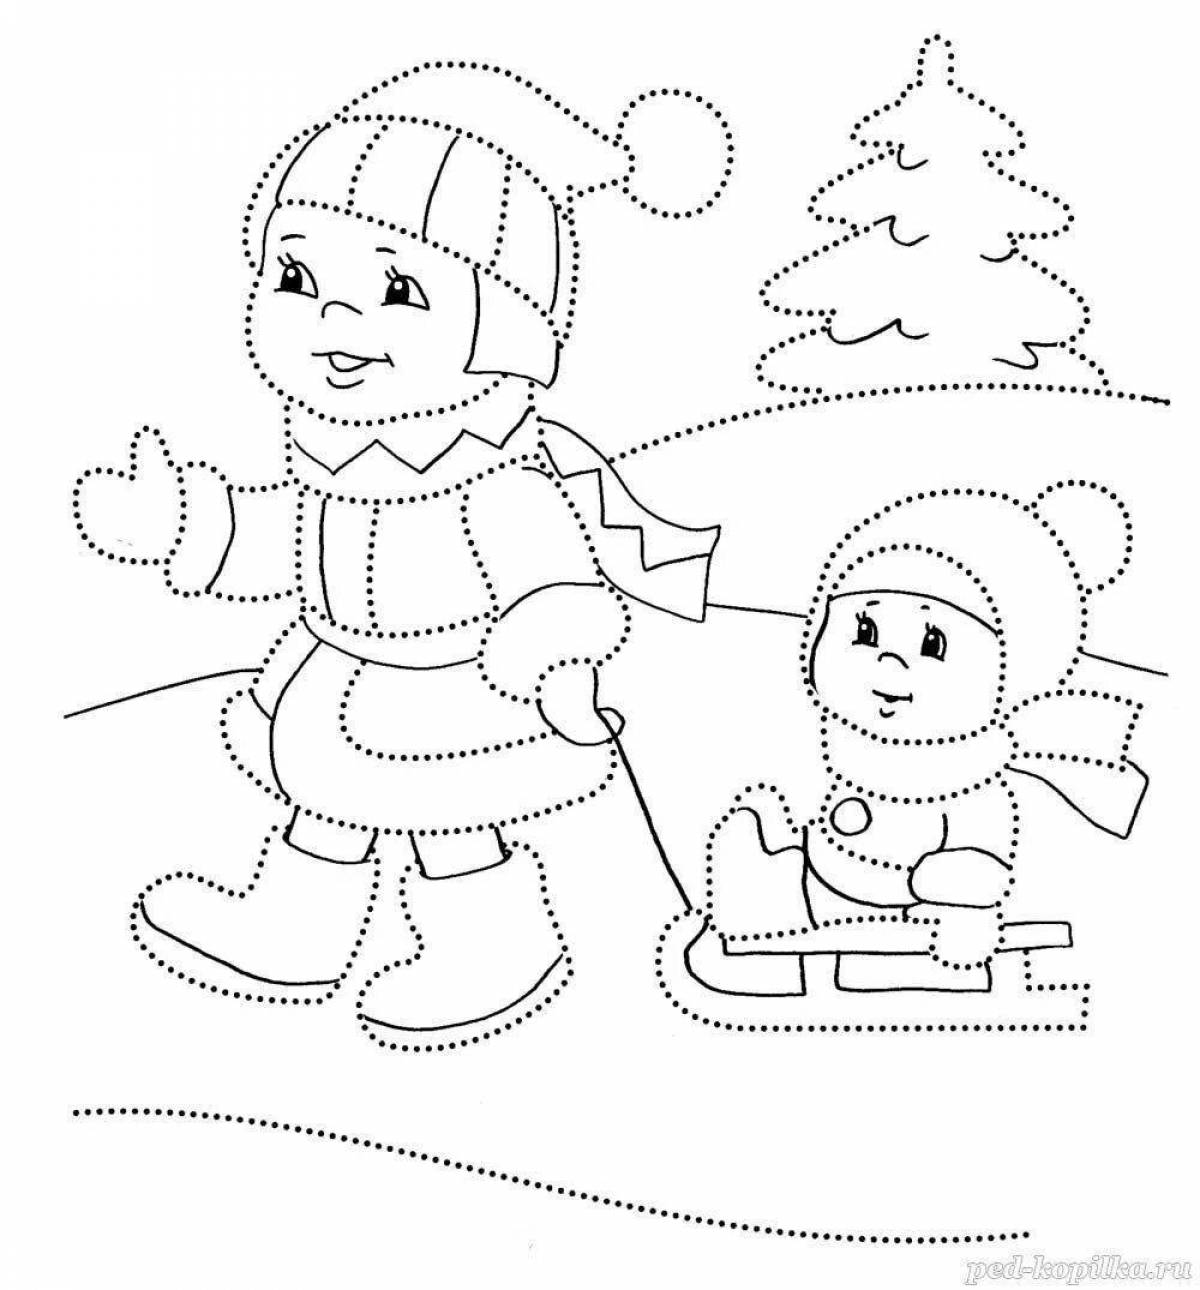 Bright winter coloring book for children 3 years old